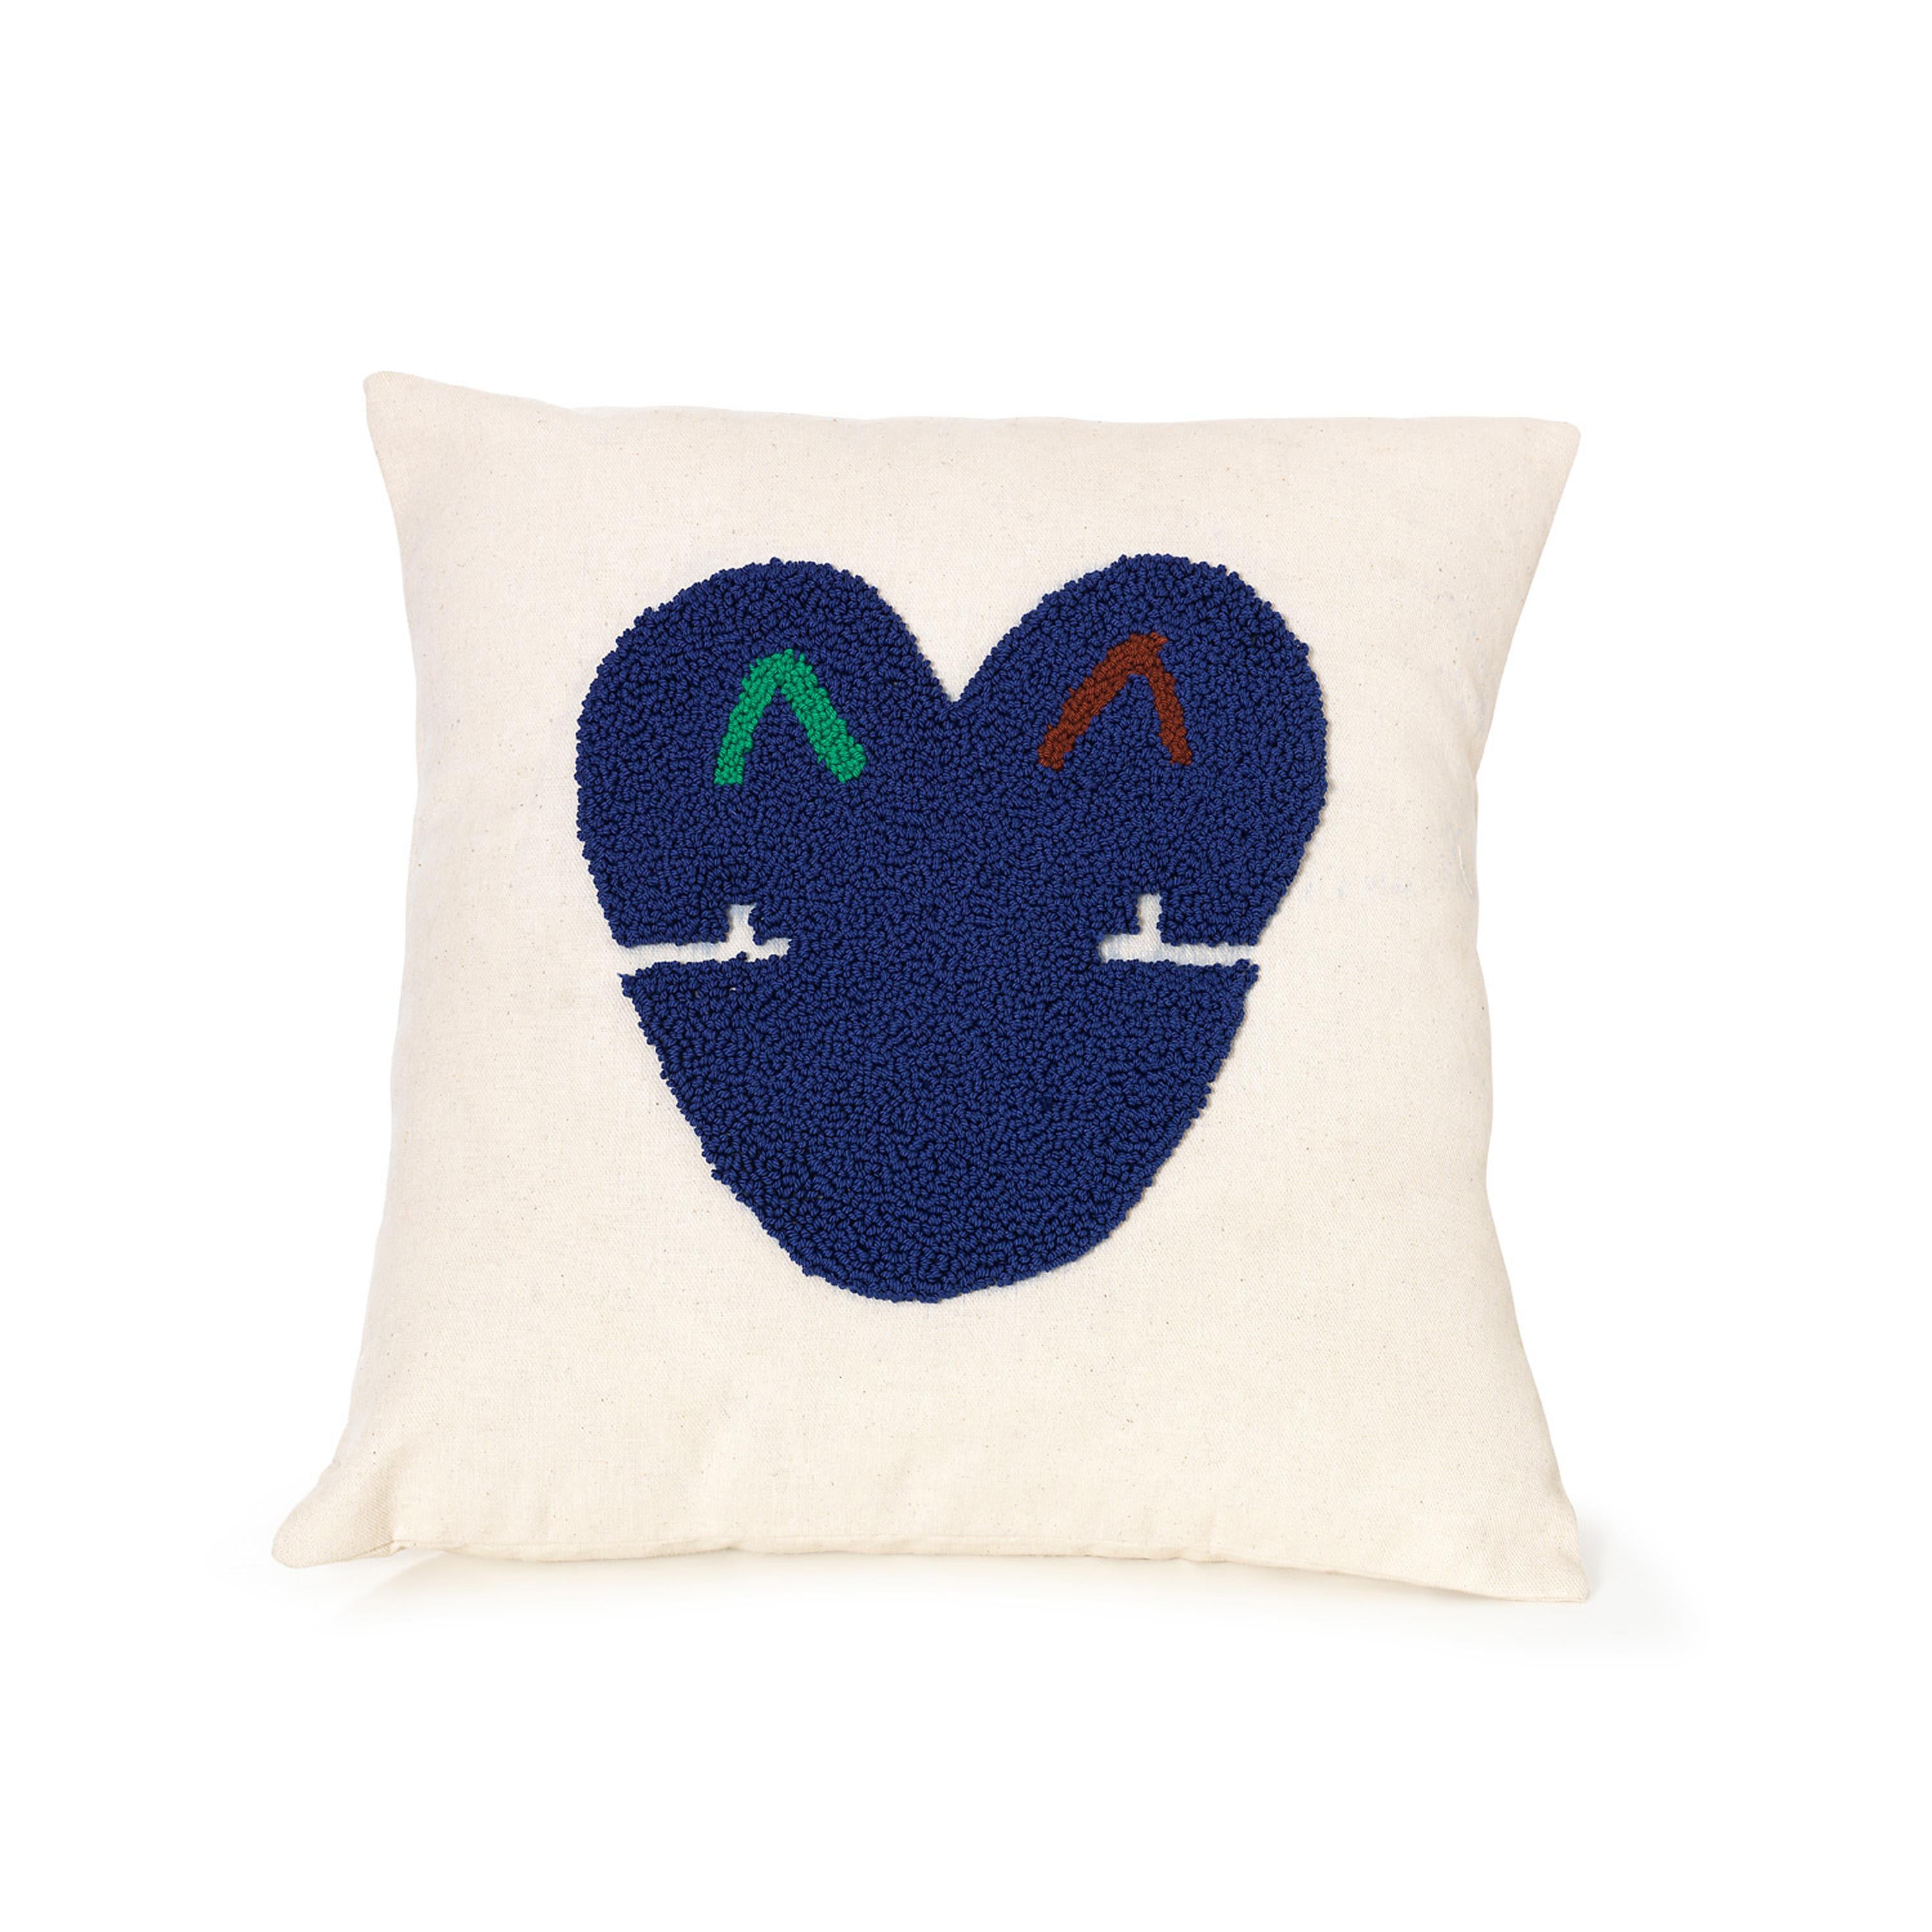 Kukuy nido cushion by Sebastian Herkner
Materials: 100% cotton. 
Technique: Hand-woven in Colombia. 
Dimensions: W 38 x H 38 cm 
Available in colors: Nature, night blue, beige pink, terracotta. 

The Nido Kukuy cushion combines joyful colors with